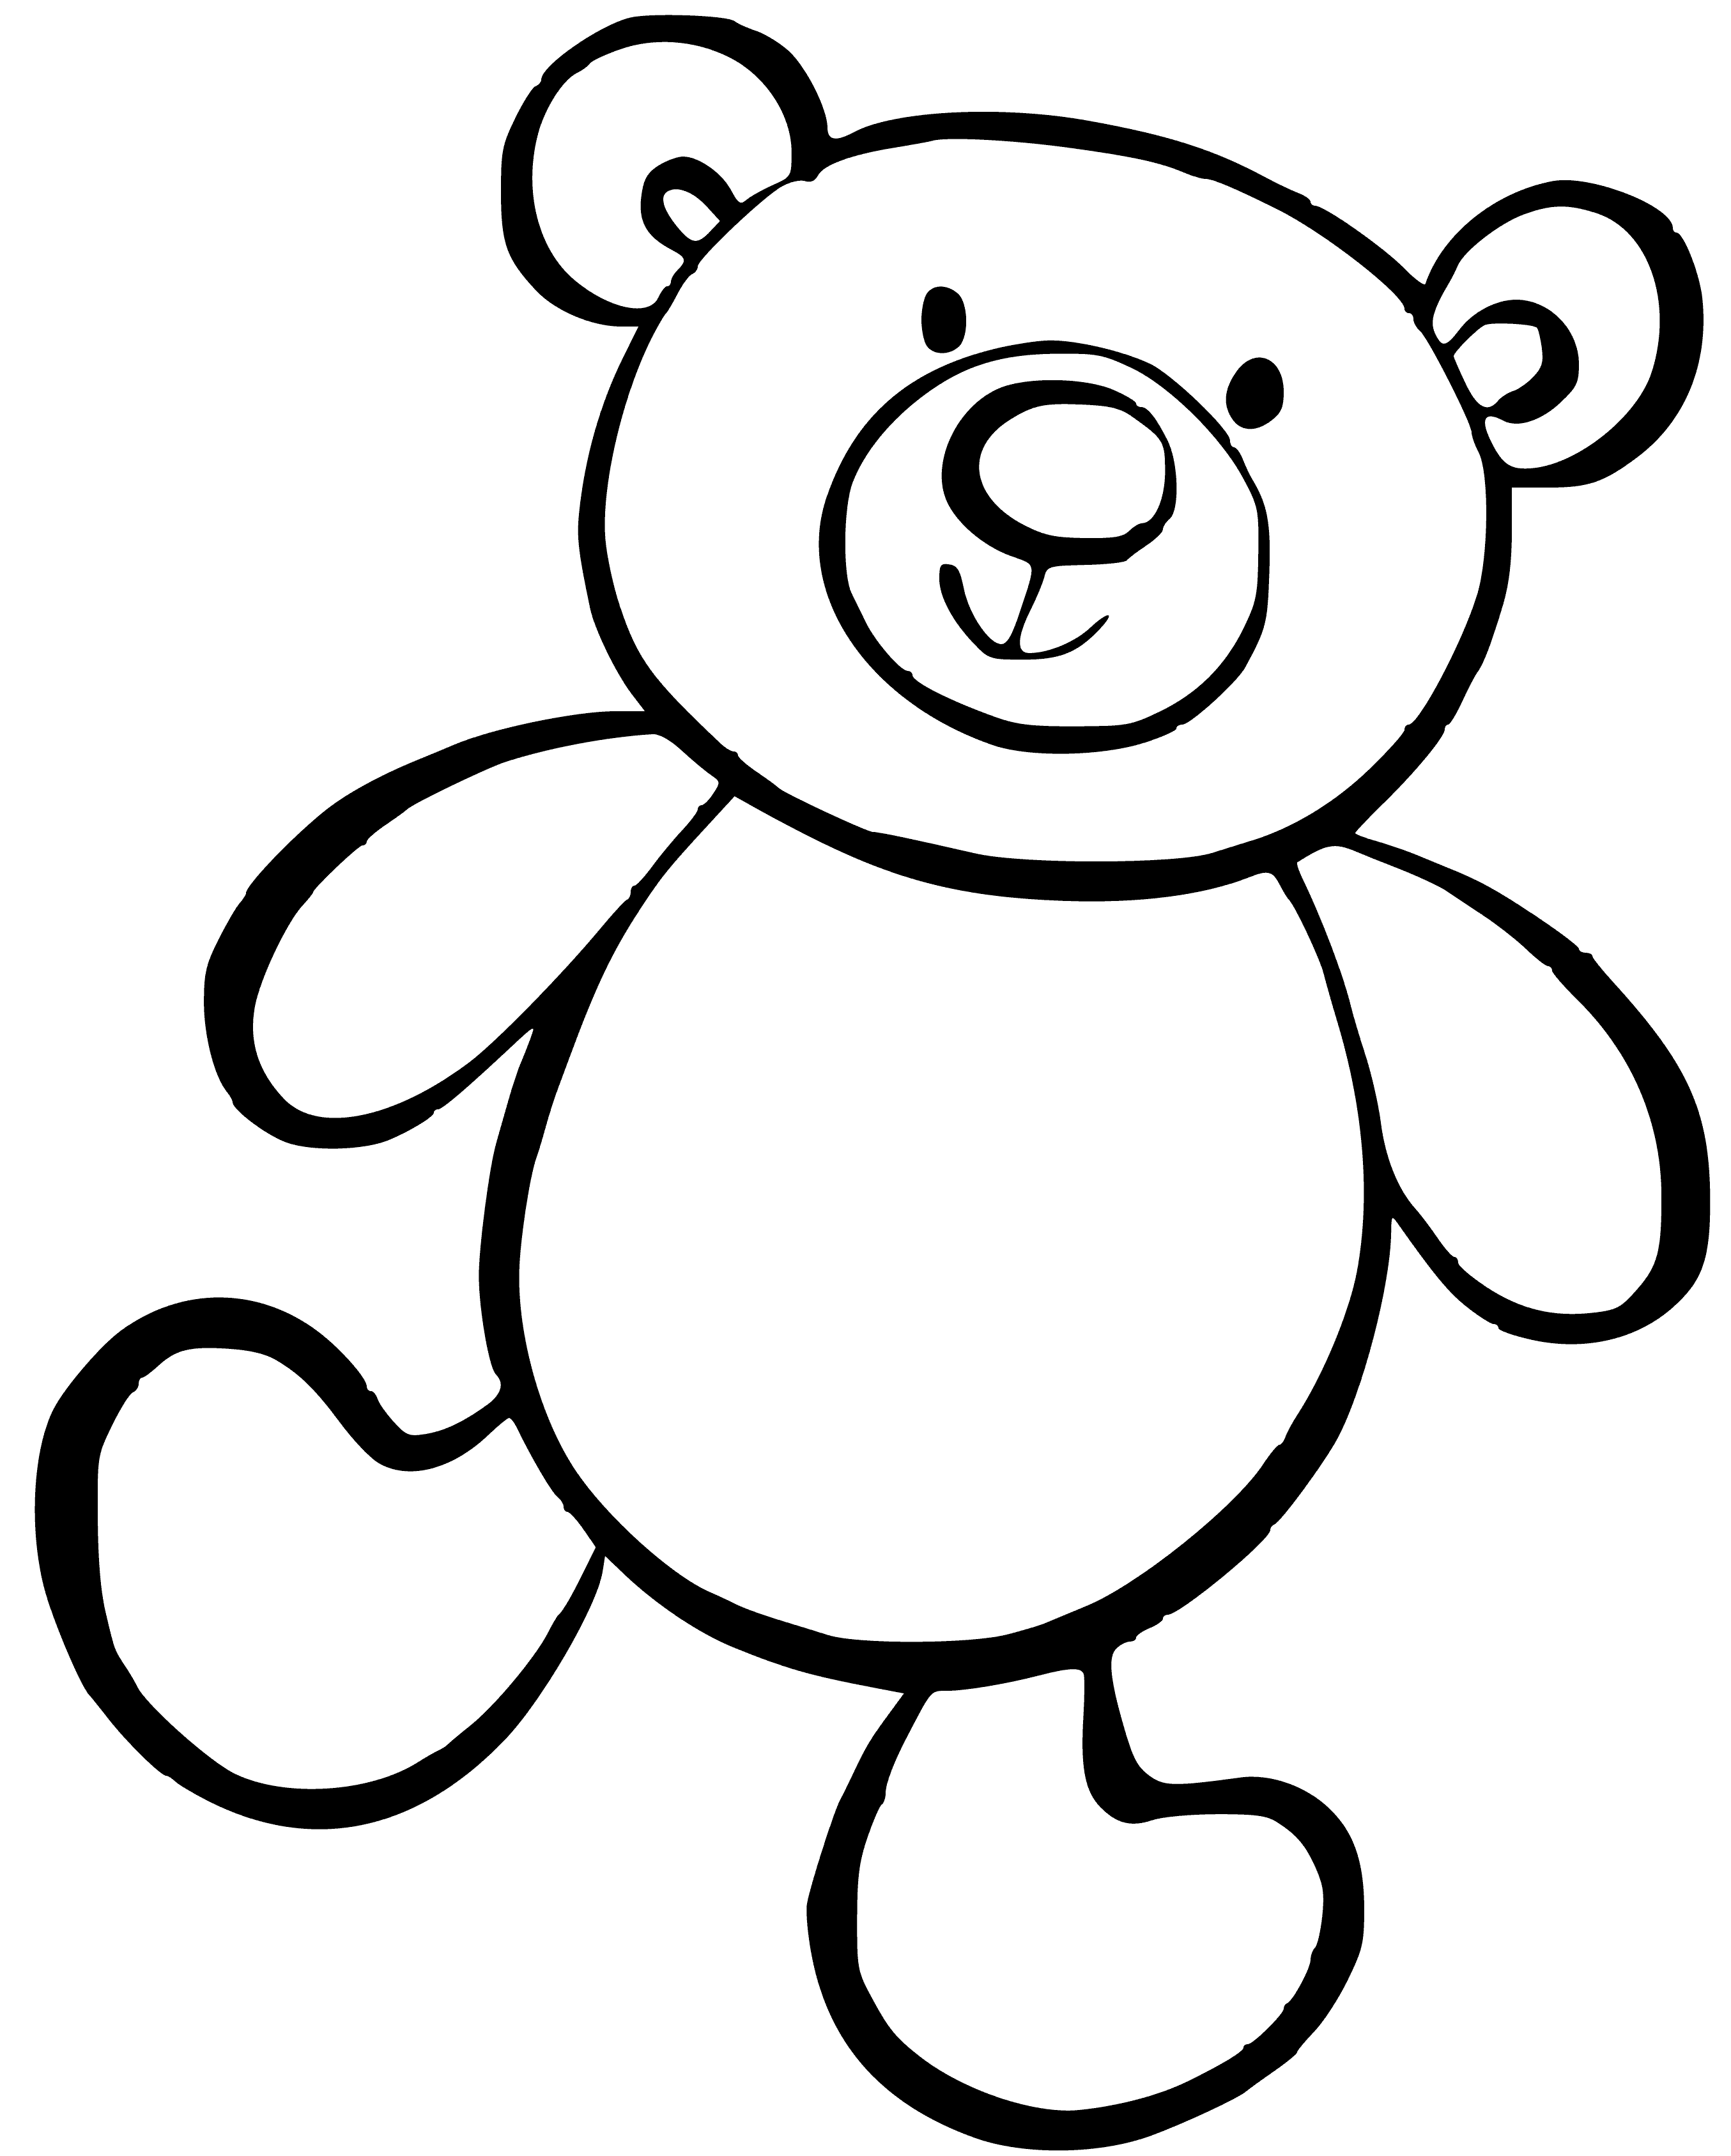 coloring page: Adorable brown teddy bear sleeps on a bed of grass, arms and legs outstretched, mouth open and eyes closed.